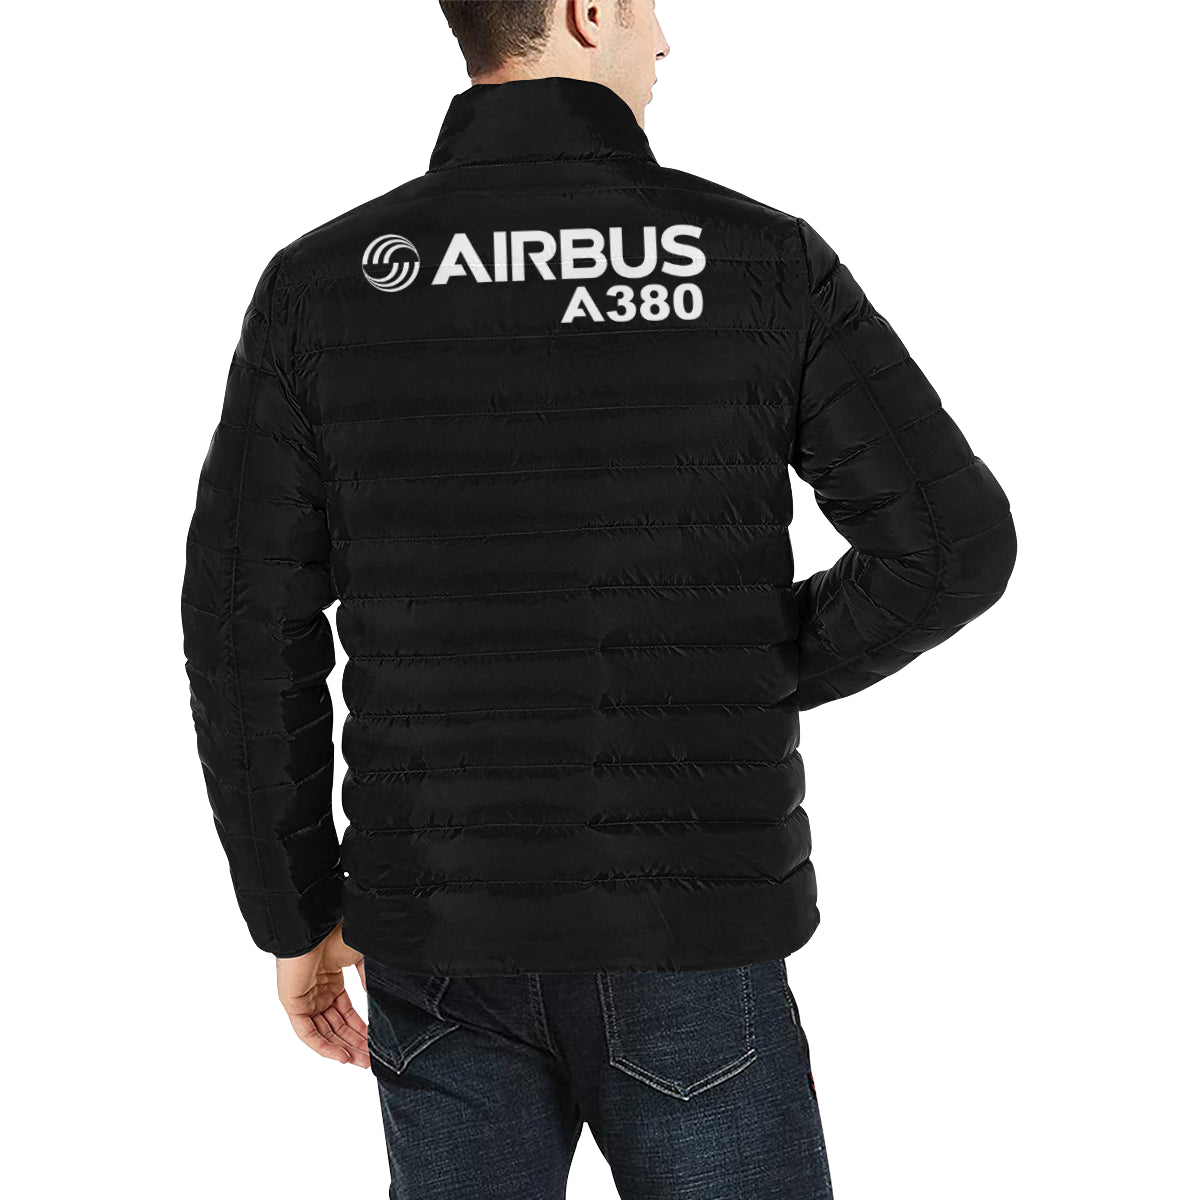 Airbus A380 Men's Stand Collar Padded Jacket e-joyer